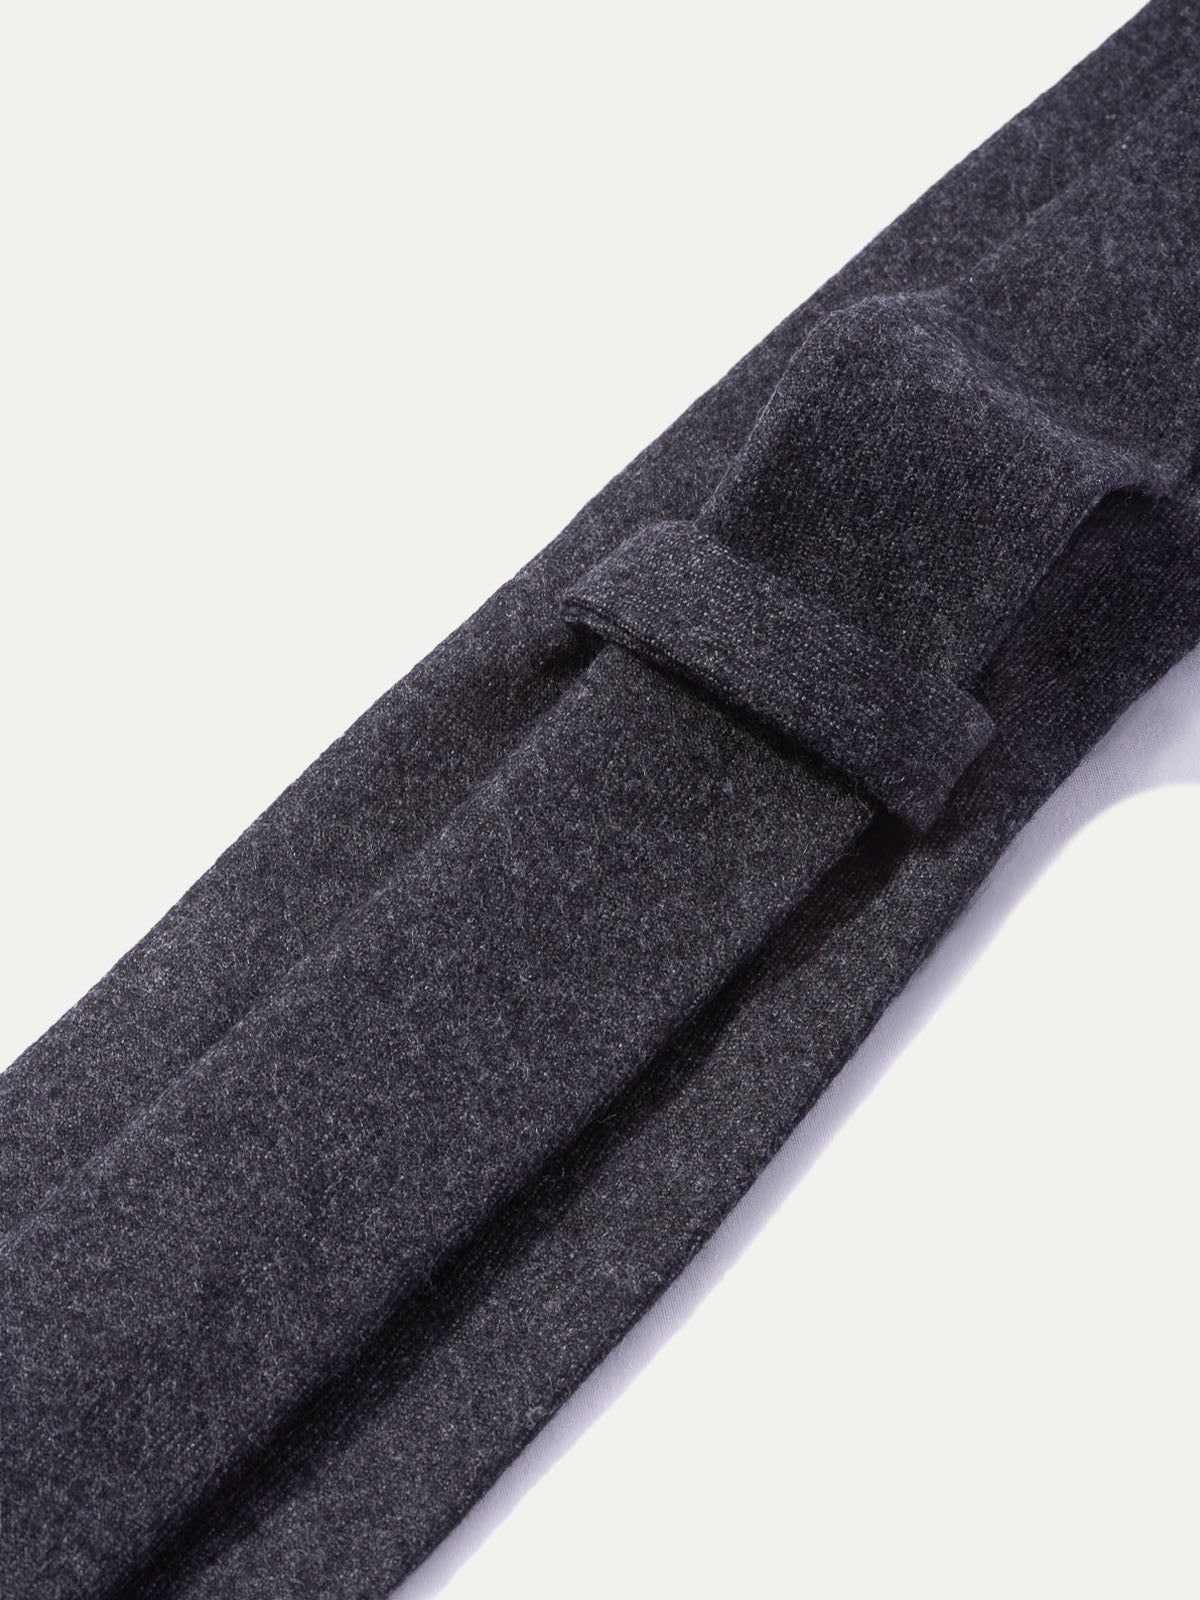 Dark grey flannel tie - Hand Made In Italy